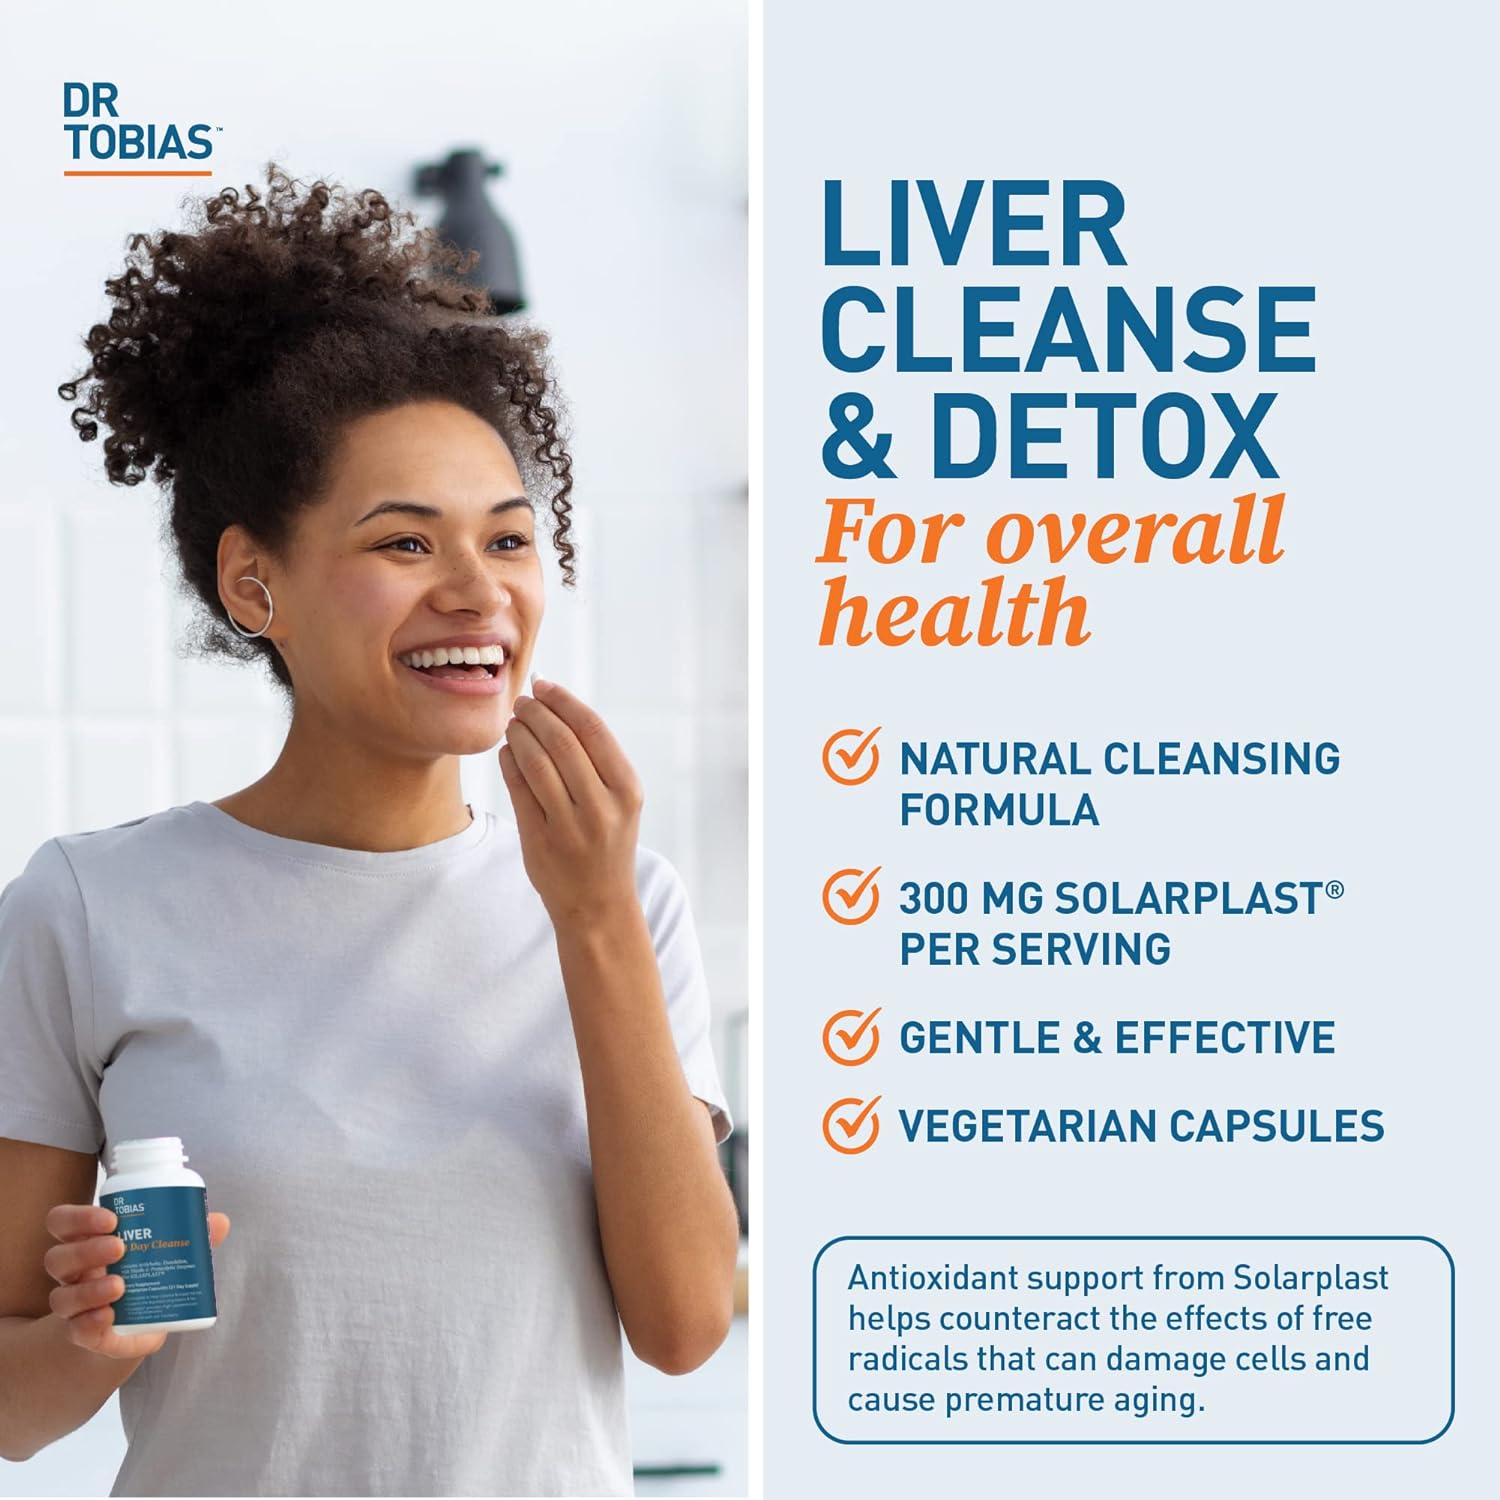 Dr. Tobias Liver 21 Day Cleanse, Herbal Liver Detox Cleanse with Solar